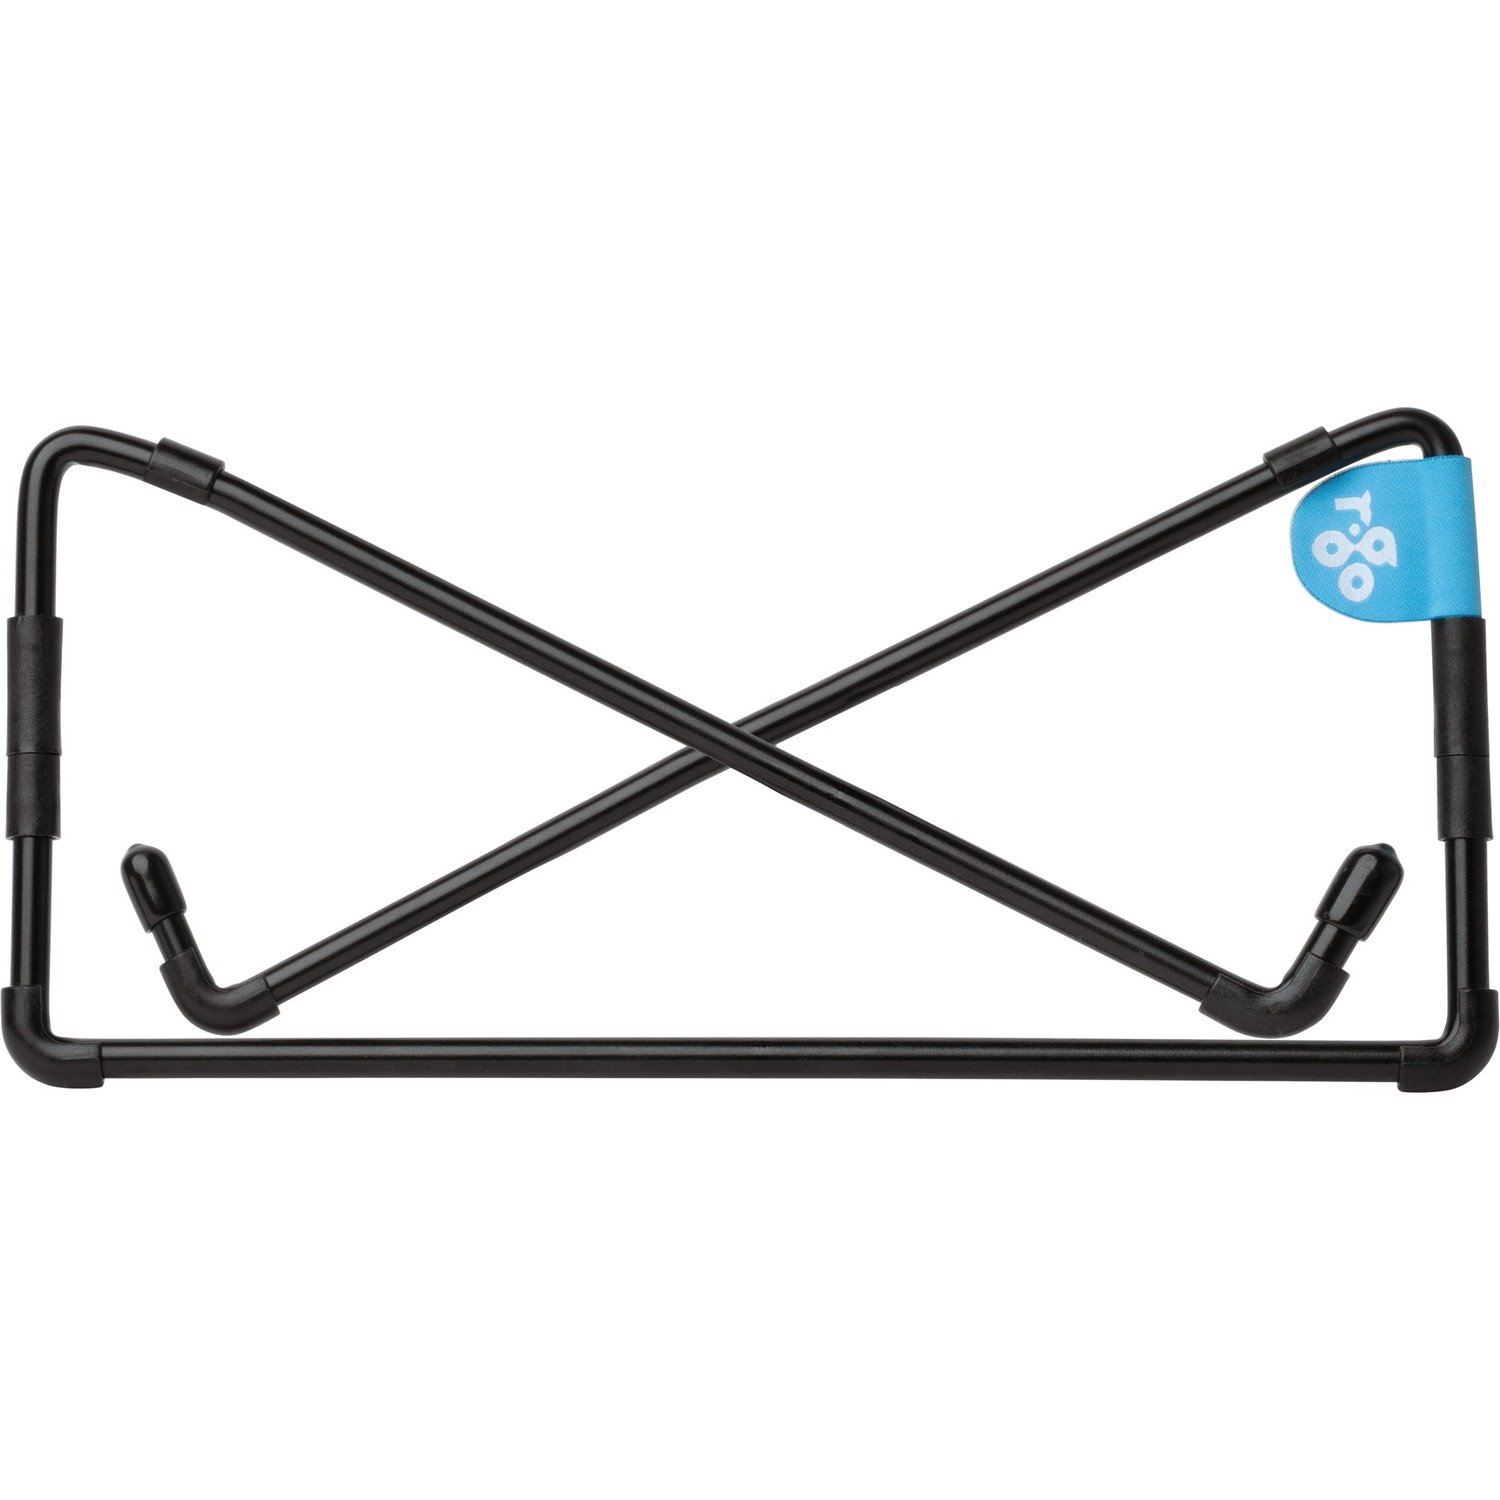 R-Go Steel Travel laptop stand